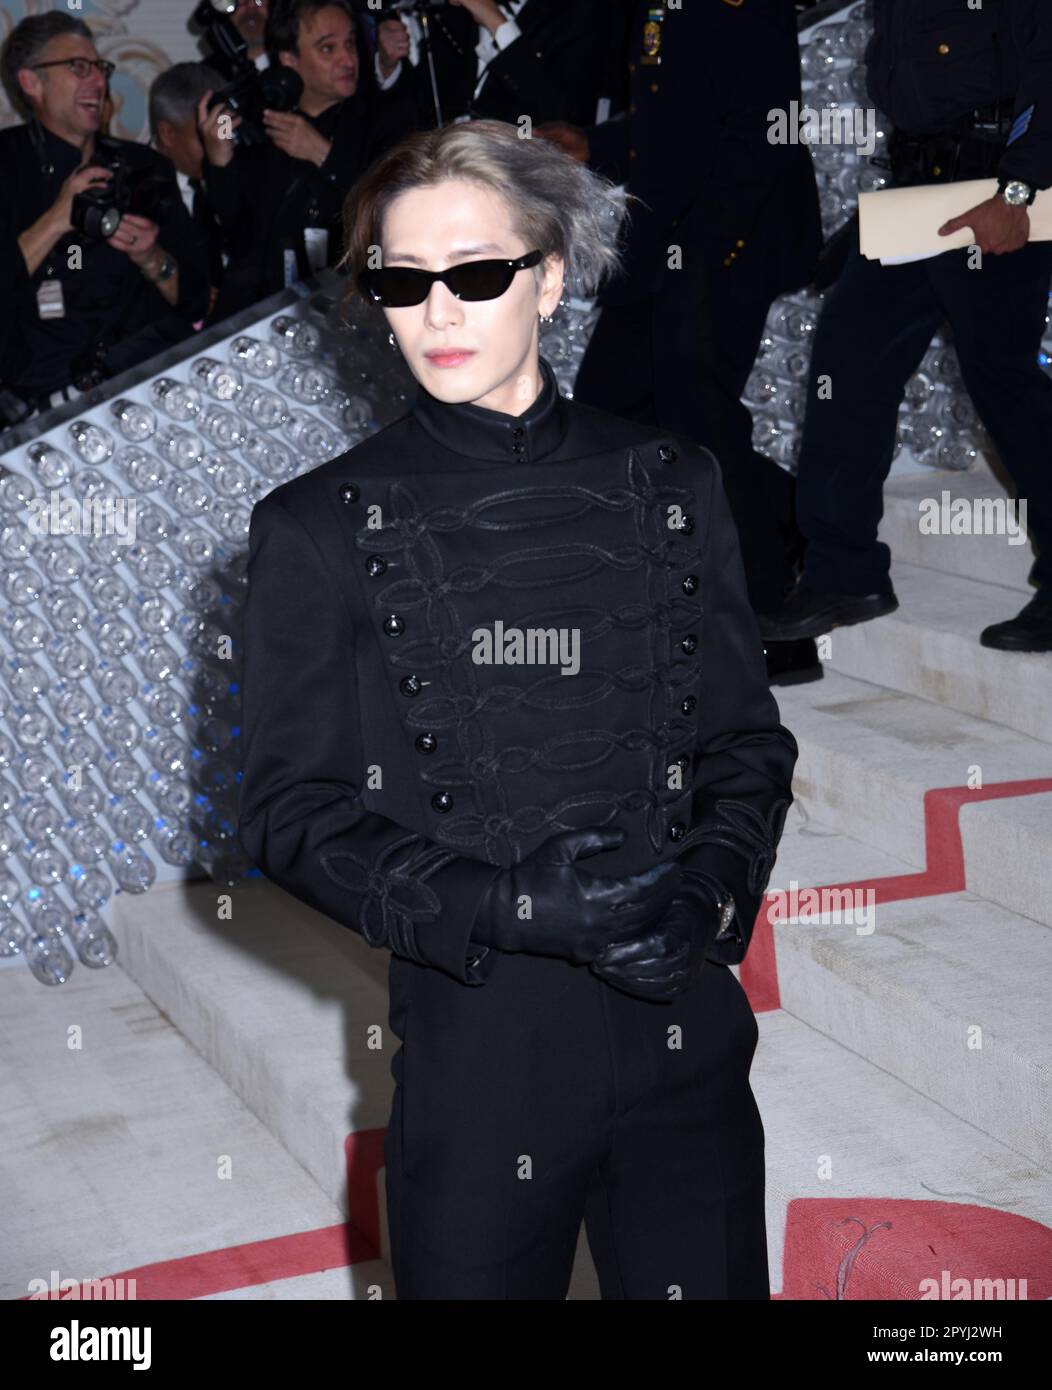 Jackson Wang attended the 2023 Met Gala charity dinner with his custom-made  suit by the house Atelier - Asia Live 365